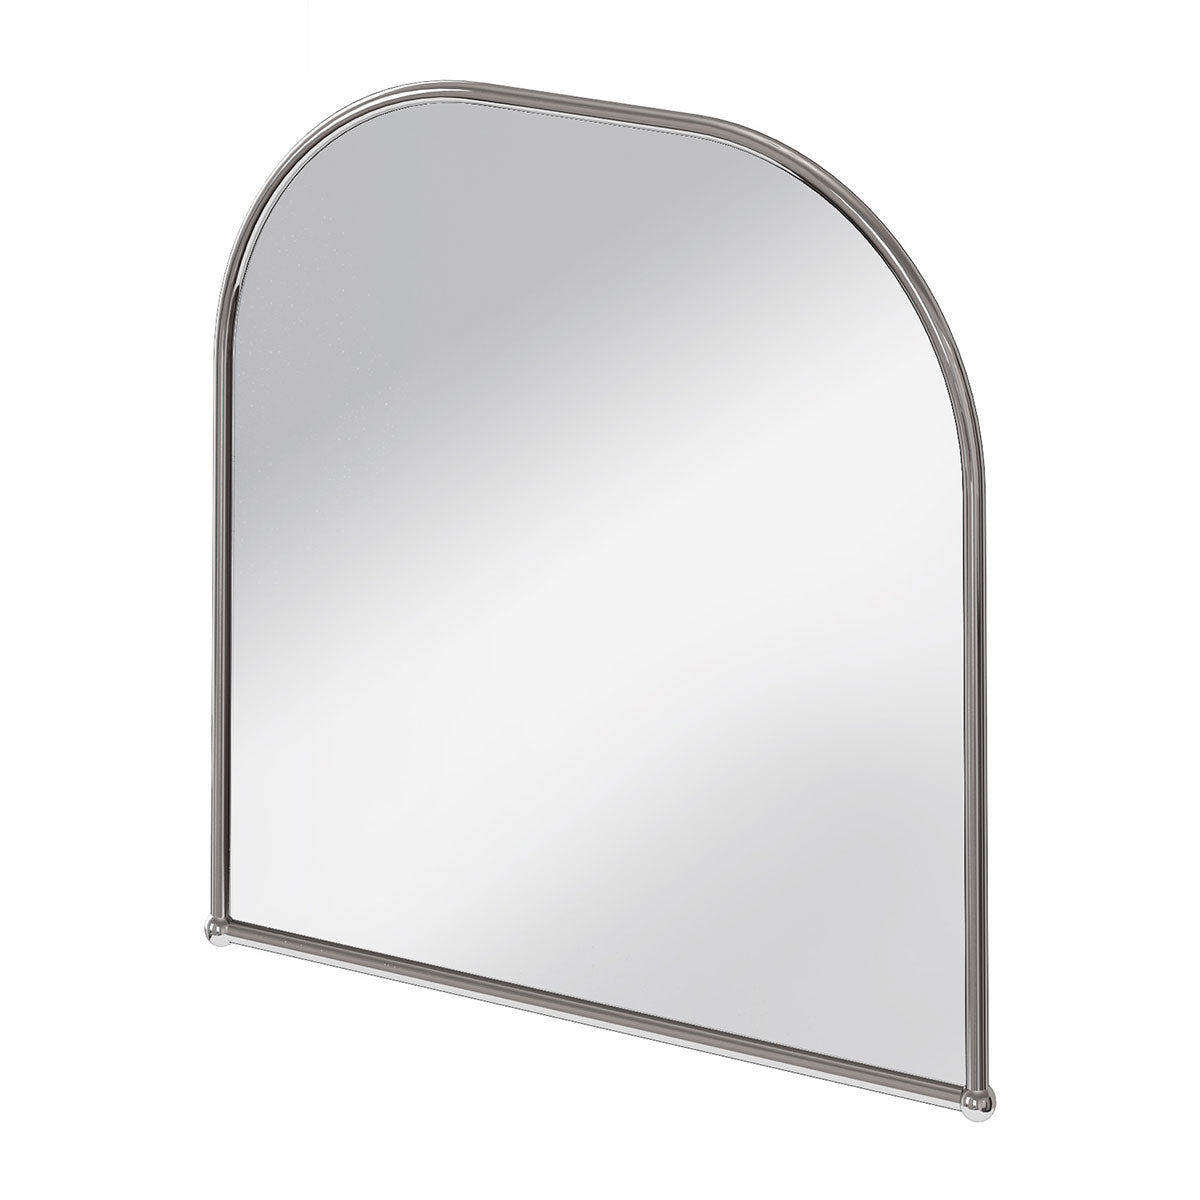 Burlington Arched Mirror with Chrome Frame Cutout Deluxe Bathrooms UK